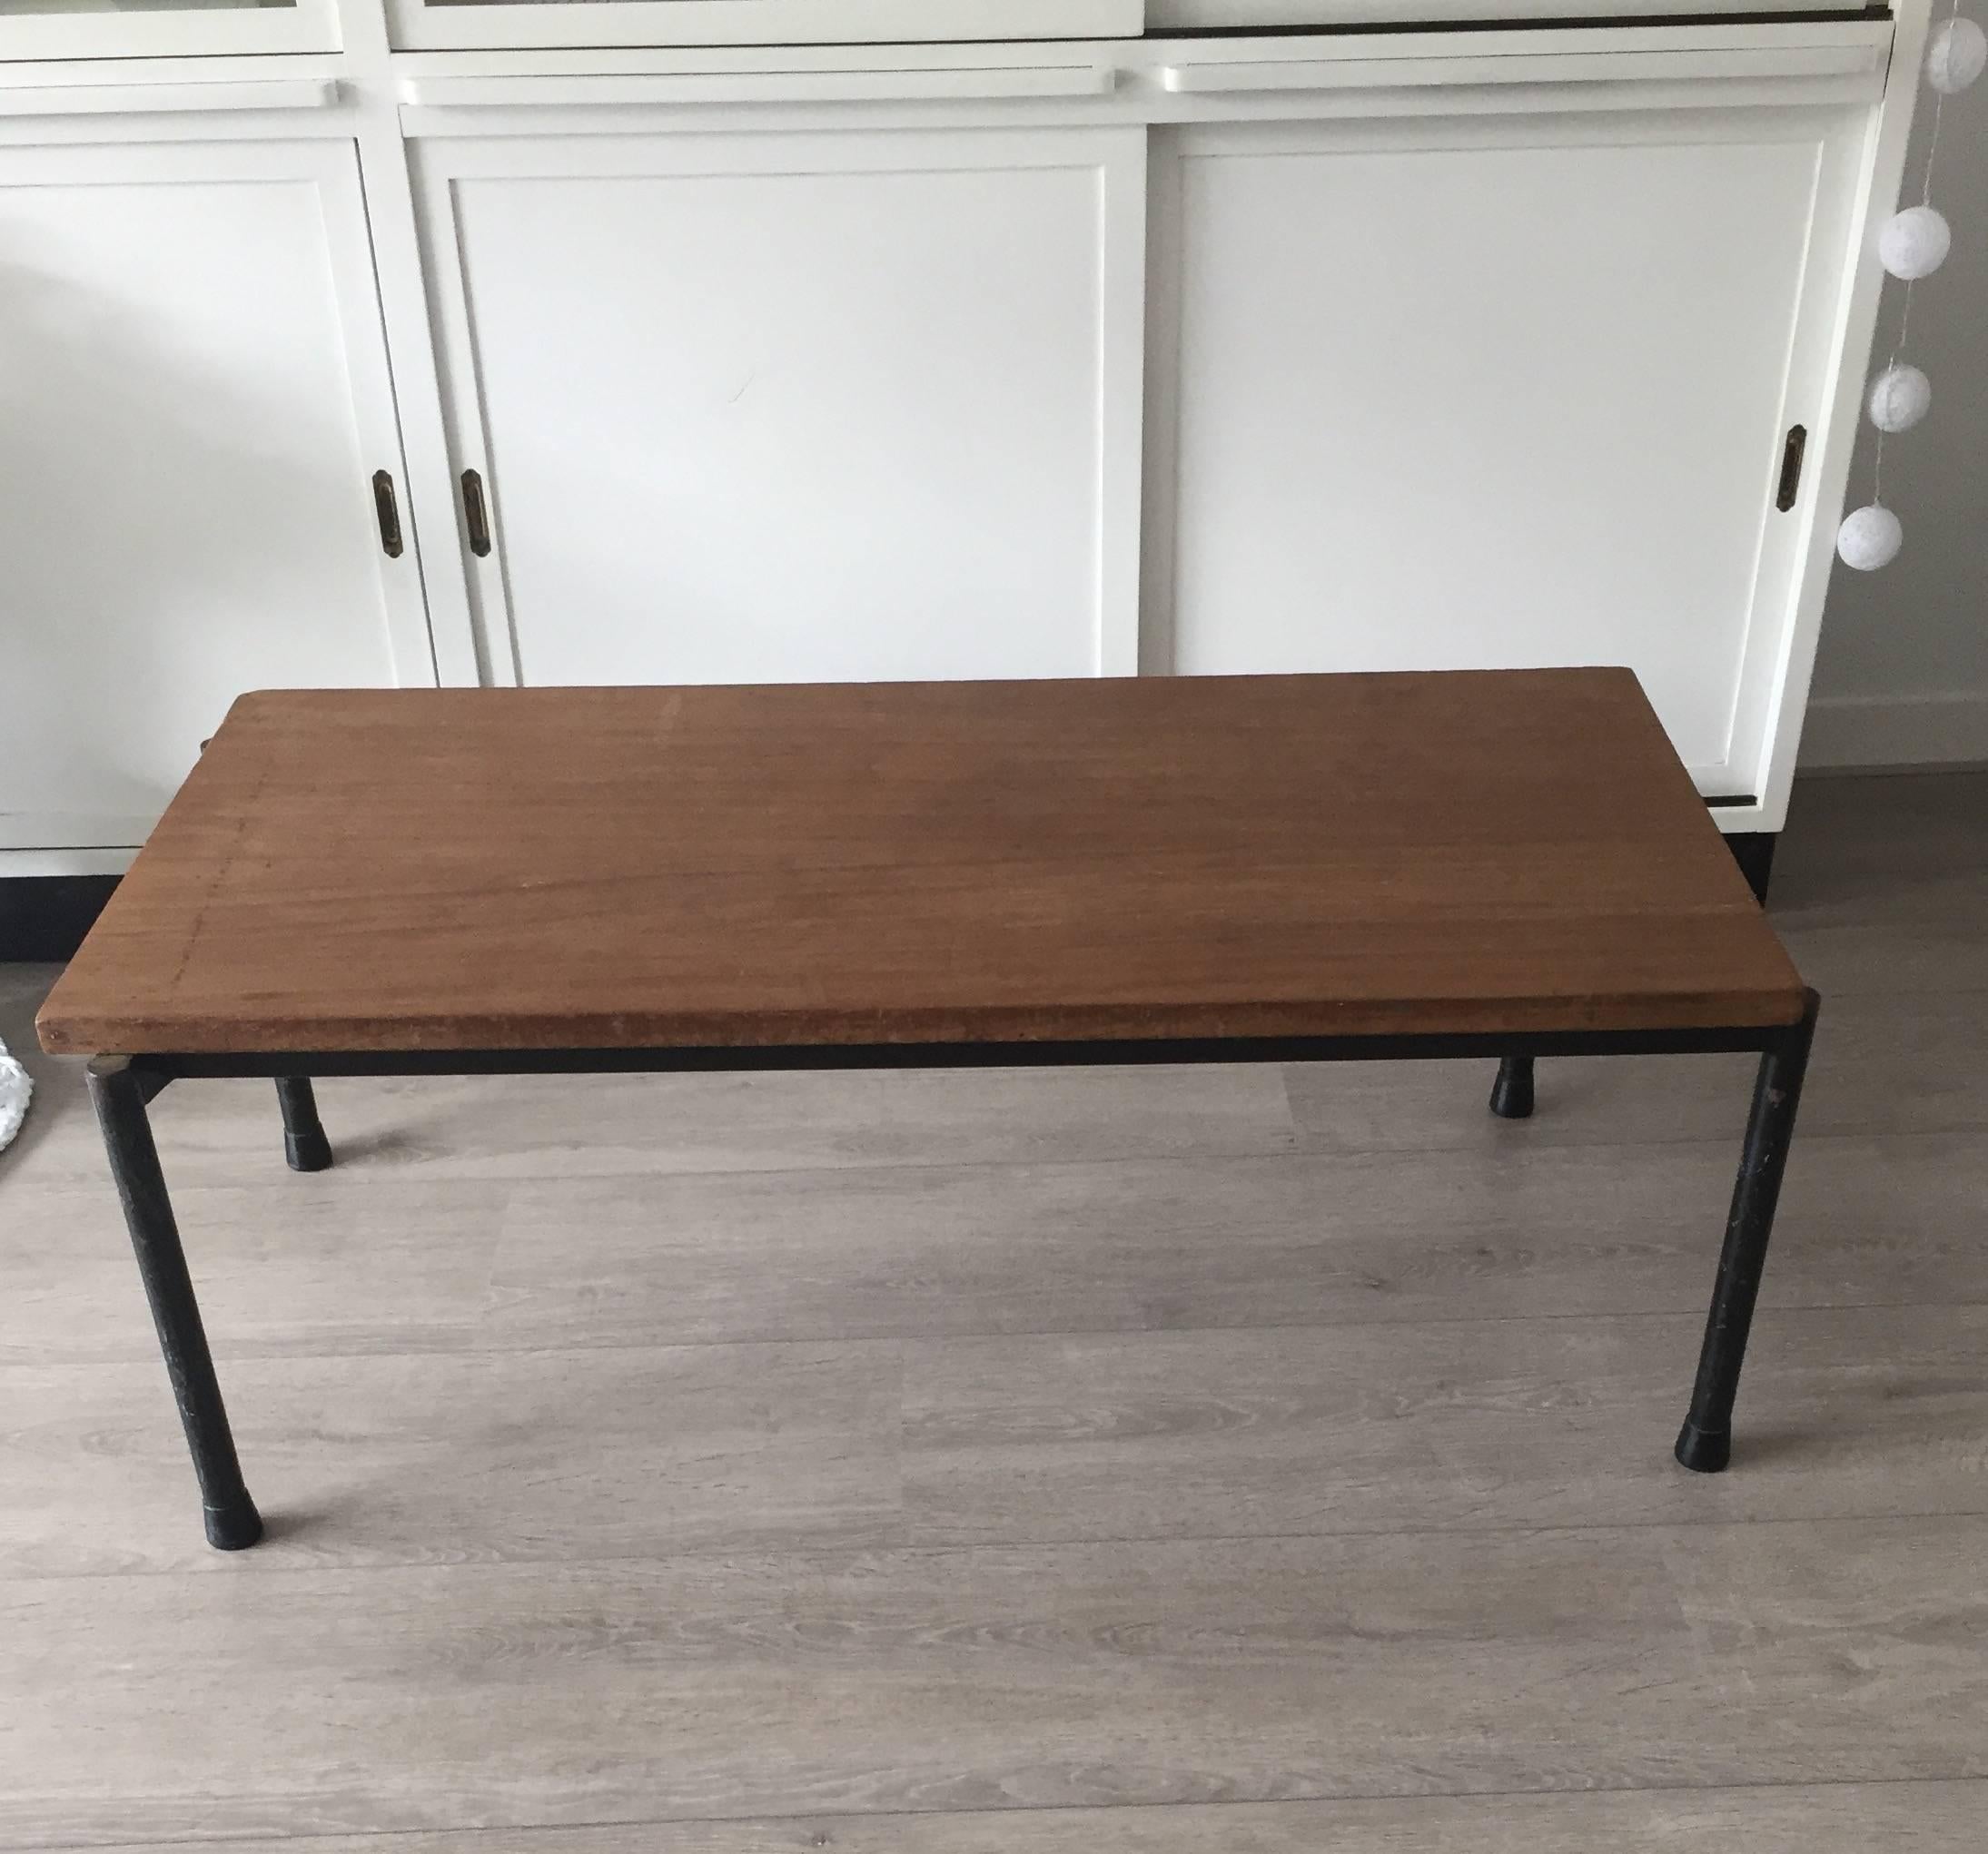 Industrial looking and very strong coffee tables.

These solid as a rock, Industrial style coffee tables would originally form the floor of a theater or performance stage. So if you want to do a dance on your table, no problem. These rectangular